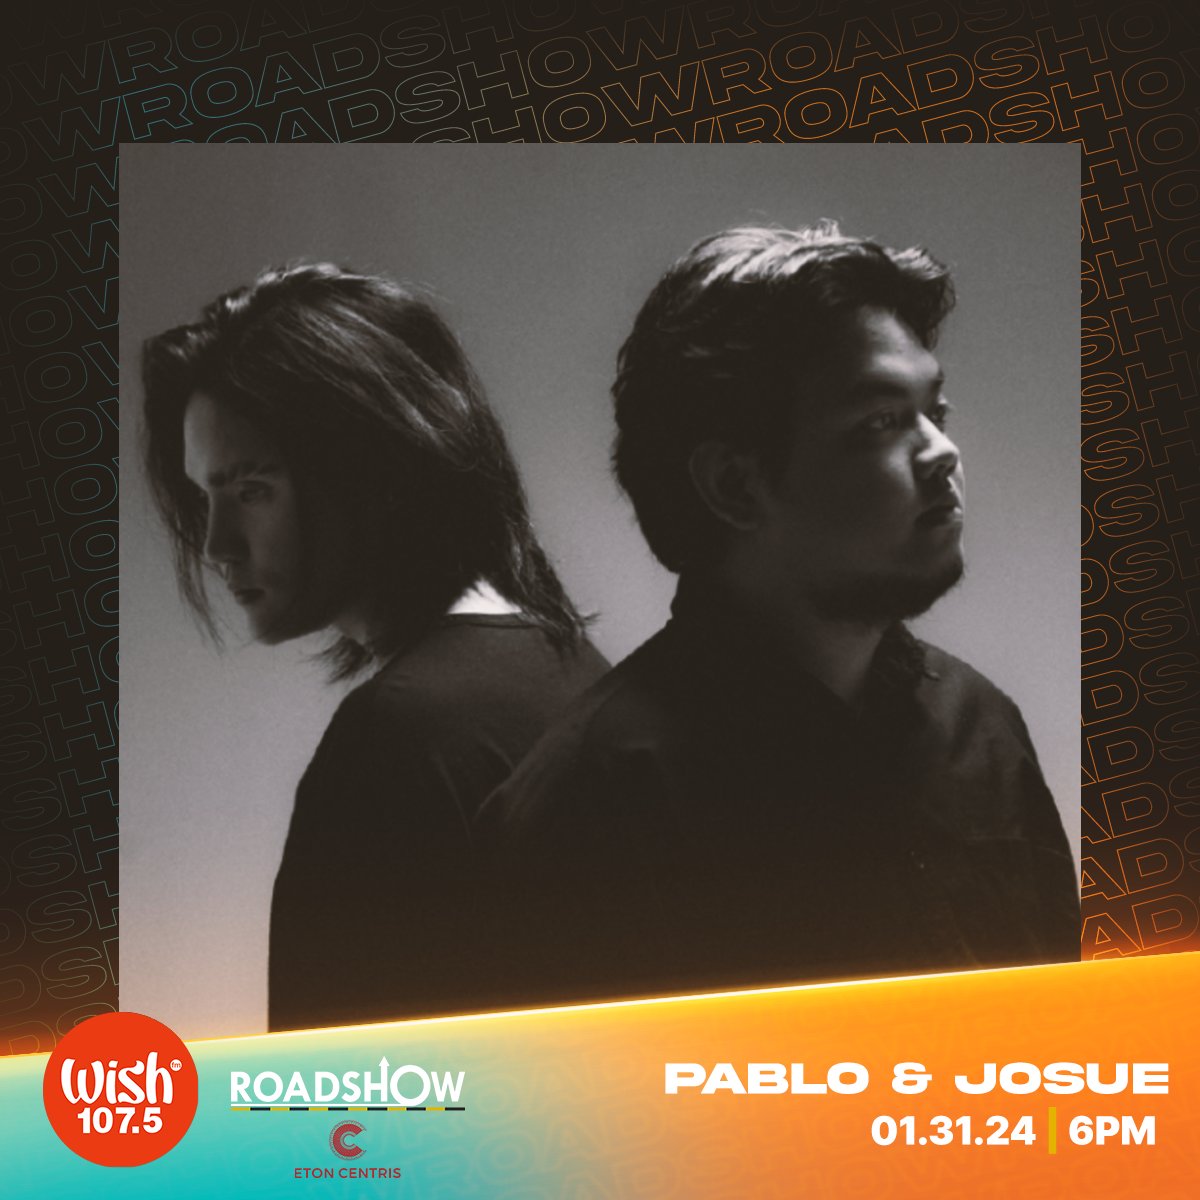 Don't miss the awaited Wish Bus return of singer-songwriter @imszmc on today's Roadshow! He will also be joined by rising artist @josuengmusika! We'll be at Eton Centris in Quezon City. See you there, Wishers!